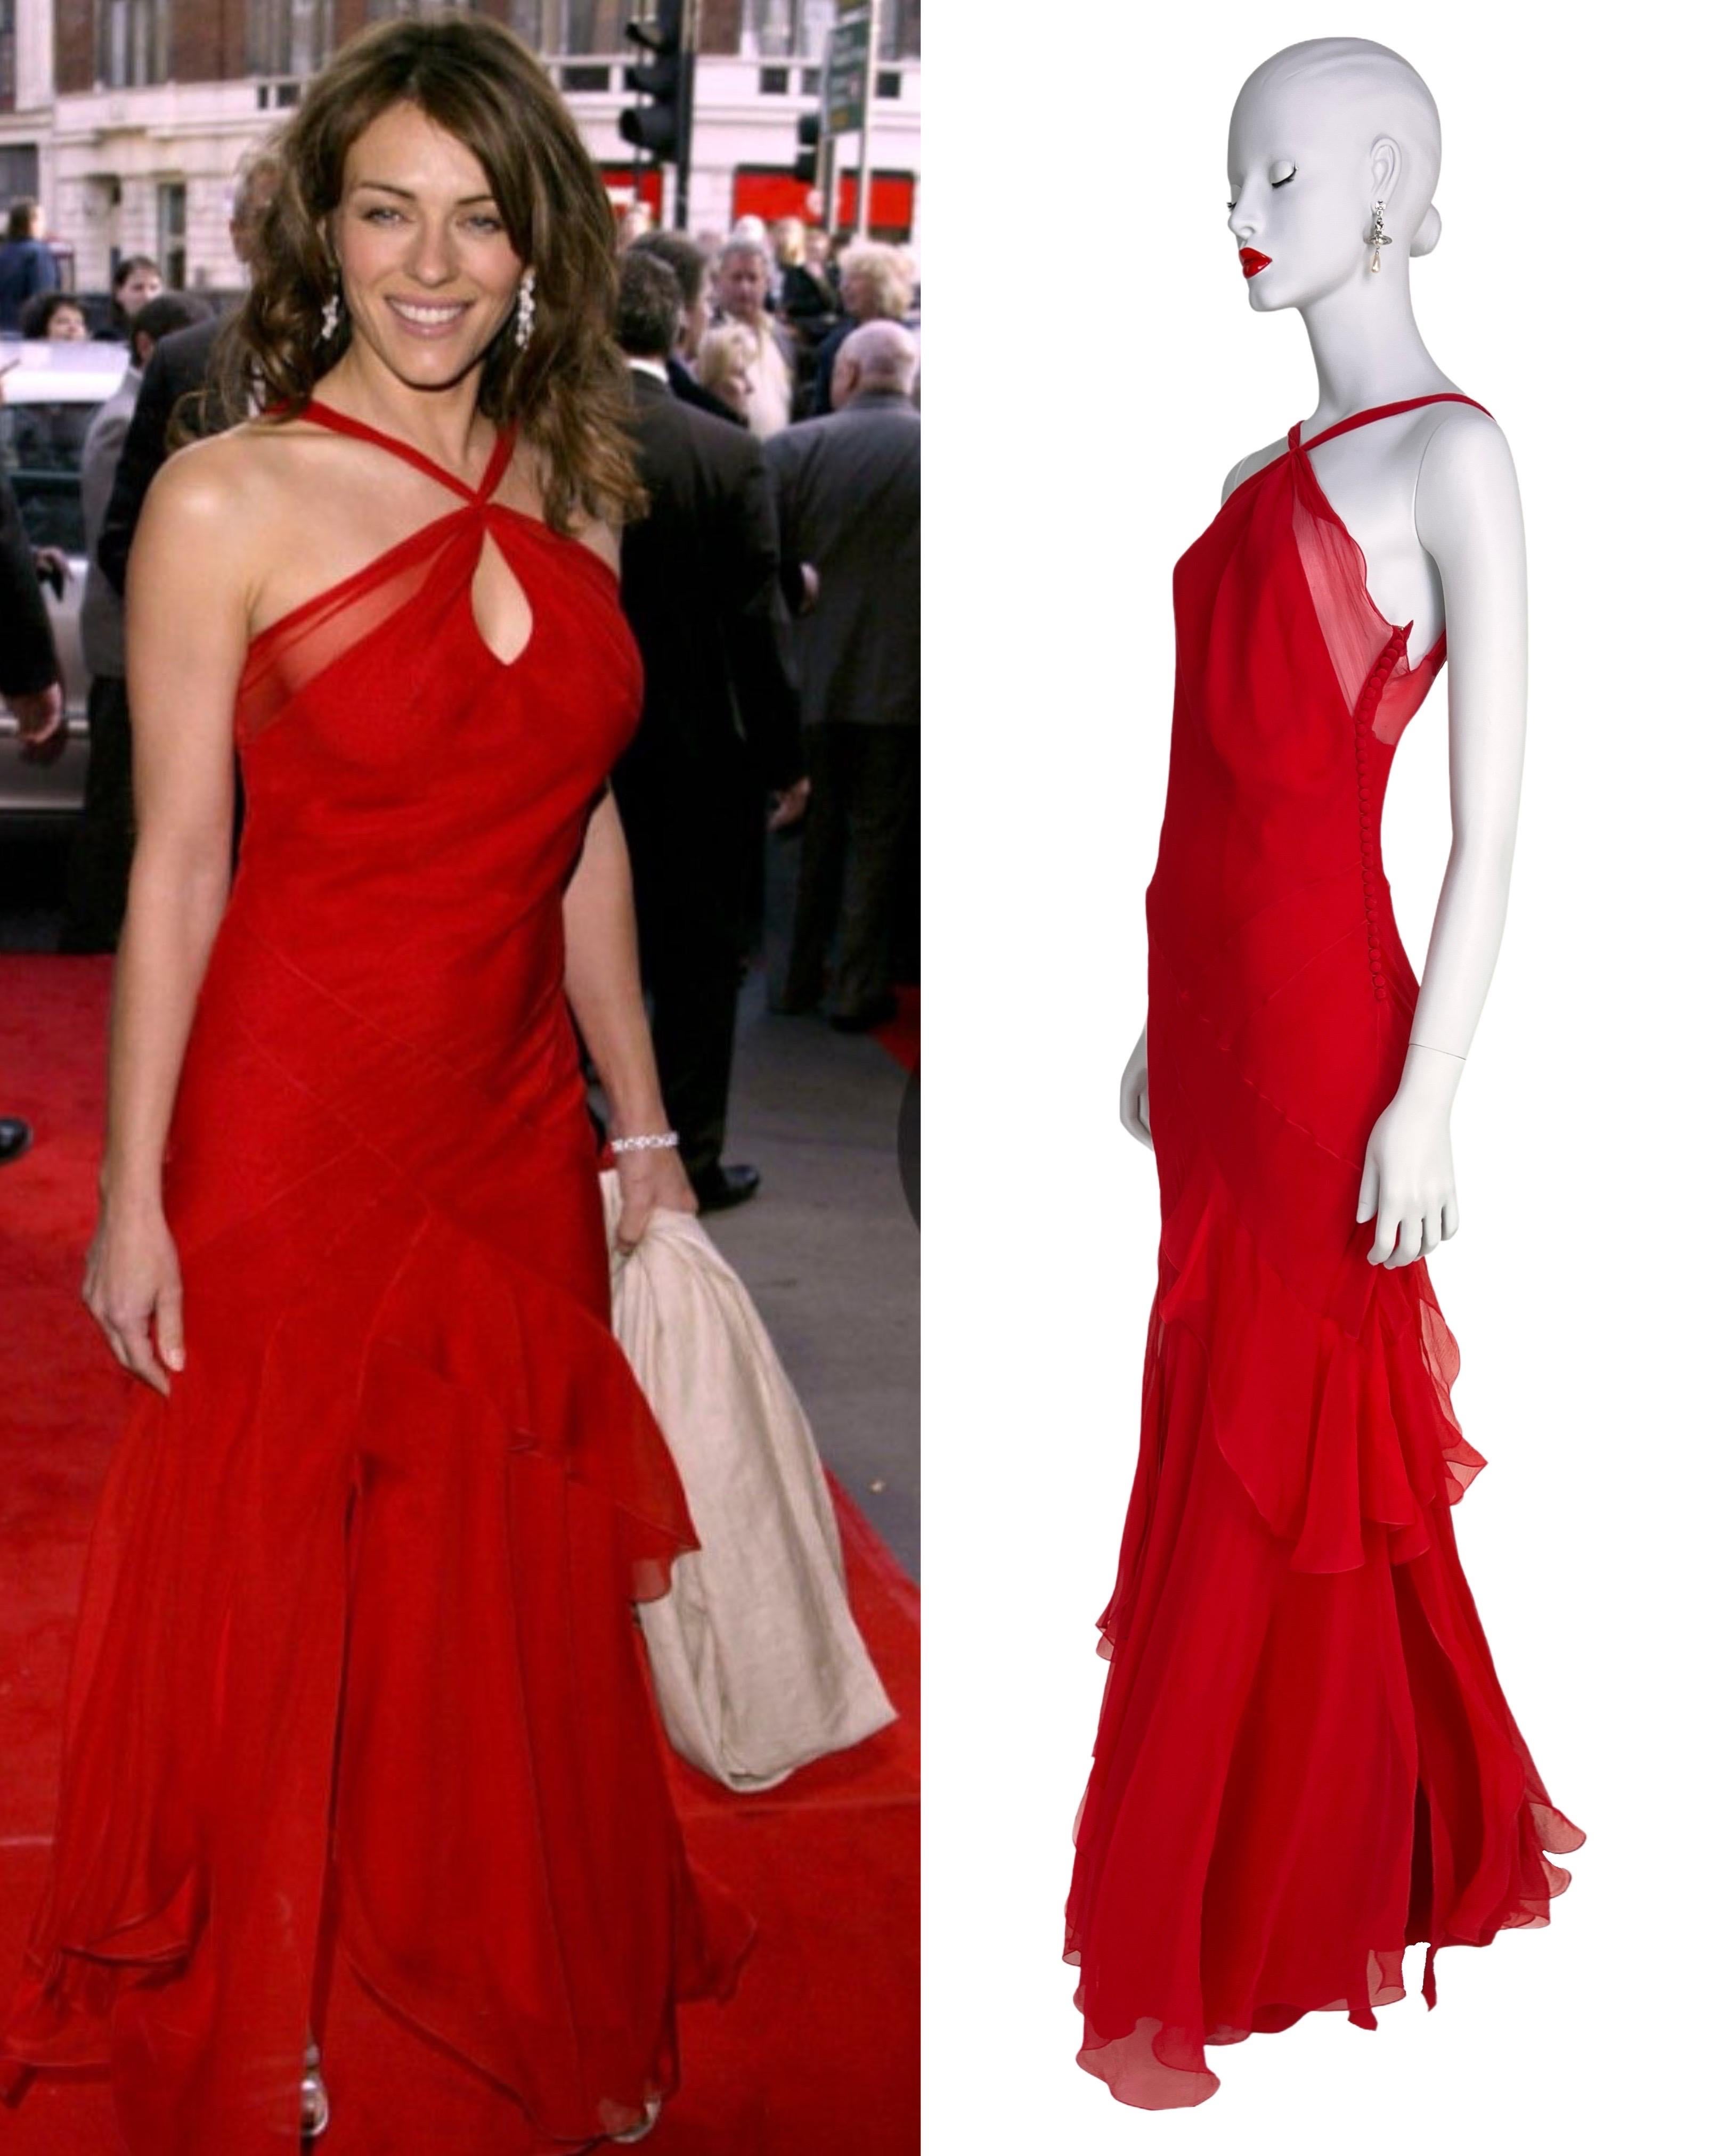 Designed by John Galliano, we introduce this stunning, flowing asymmetrical dress, as seen on Elizabeth Hurley in 2005. The skirt has slits of various height, which creates a lot of movement of the dress.

Size label is missing, but the fit